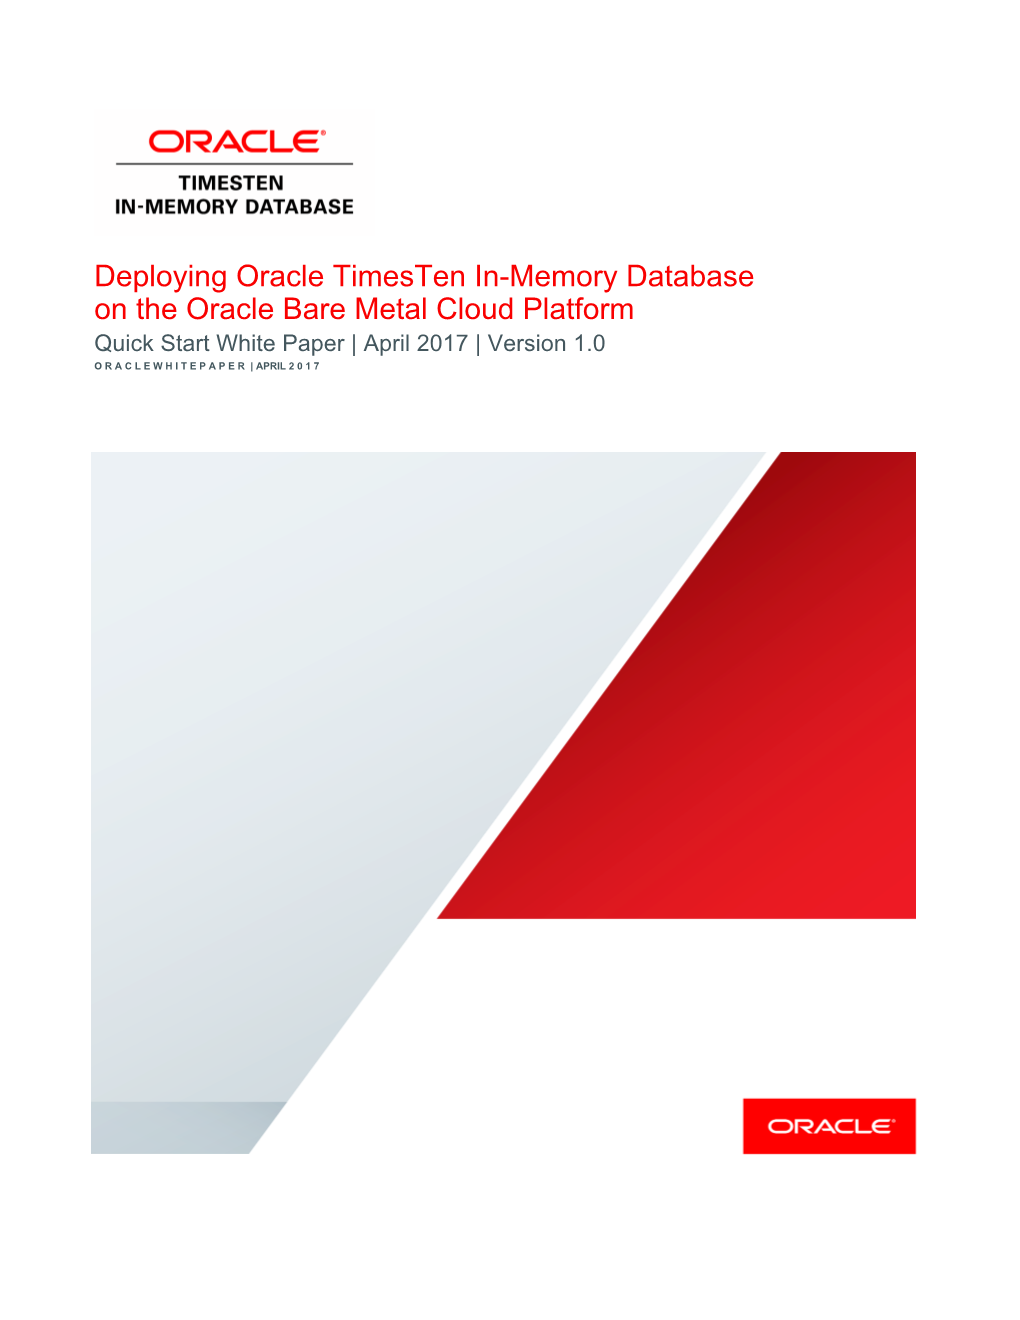 Deploying Oracle Timesten In-Memory Database on the Oracle